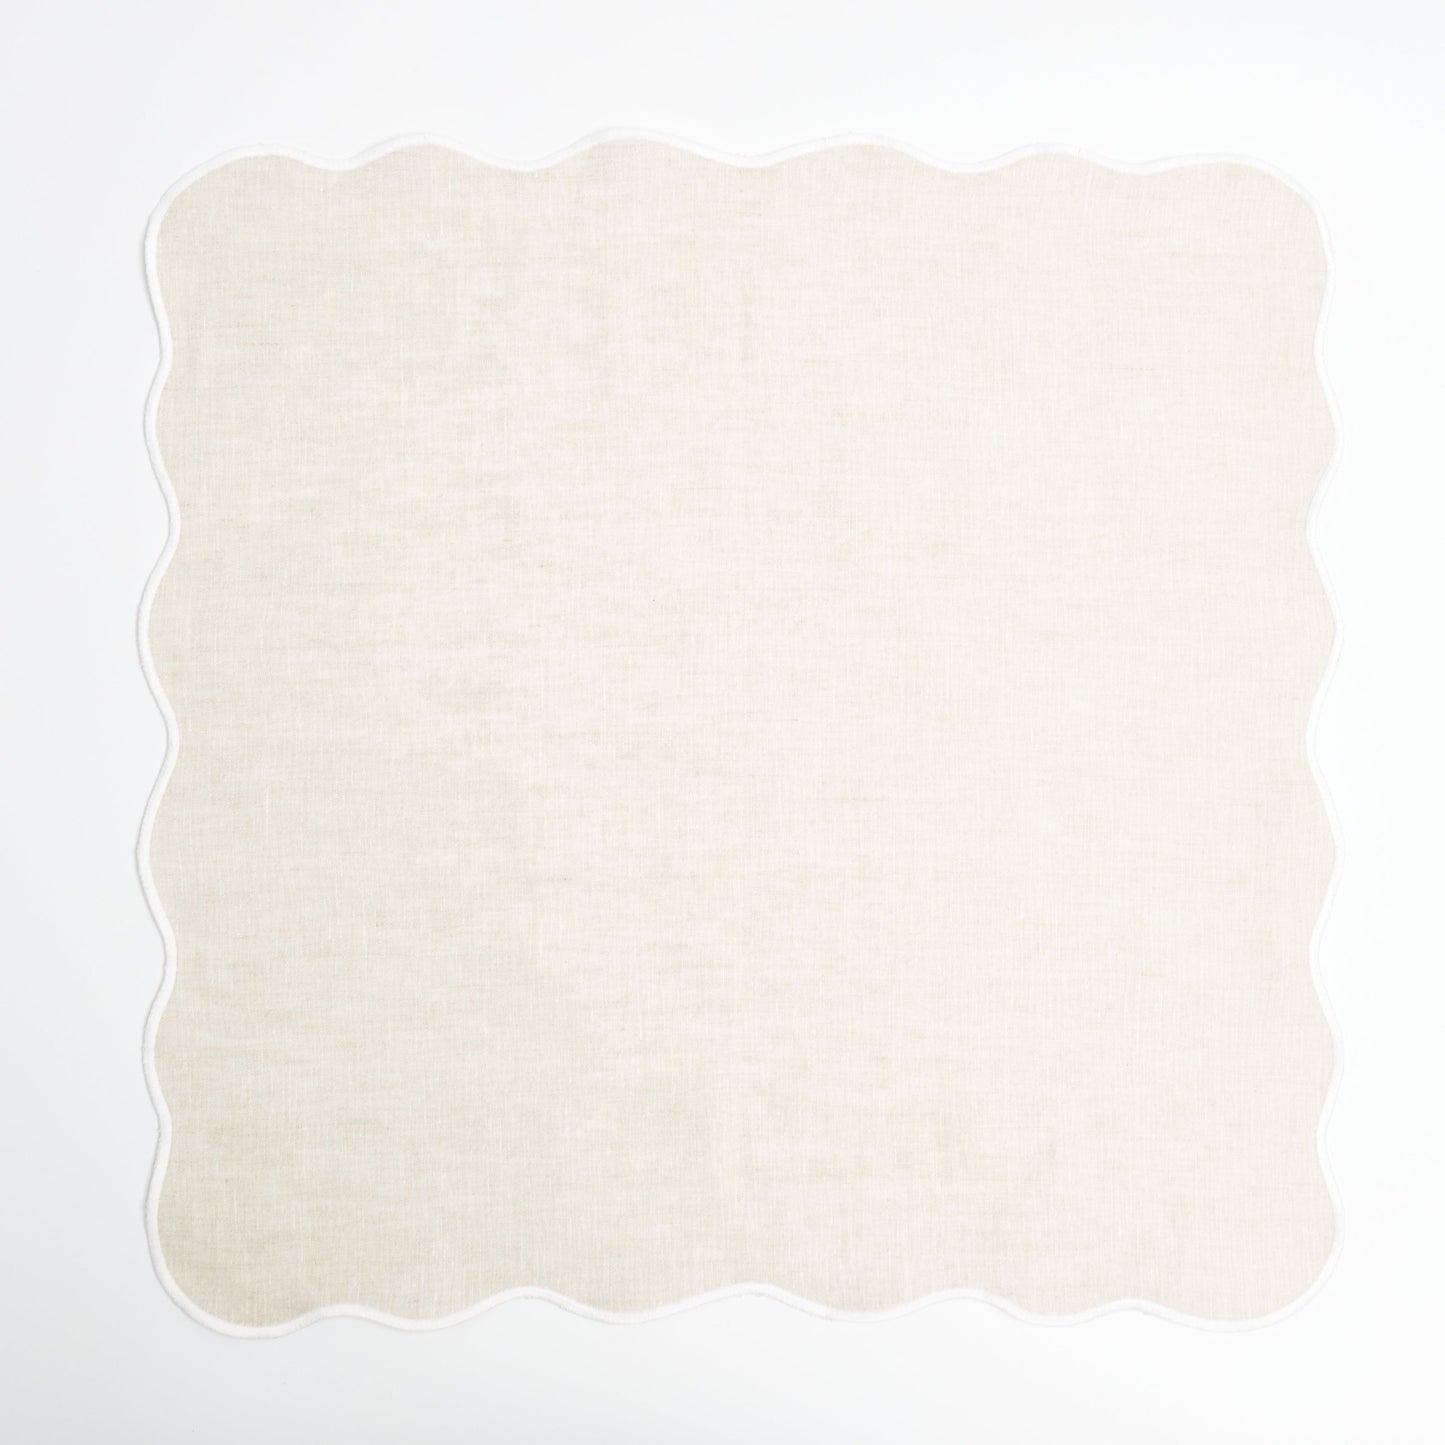 Beige Linen Napkins with White Embroidery (Set of 4)